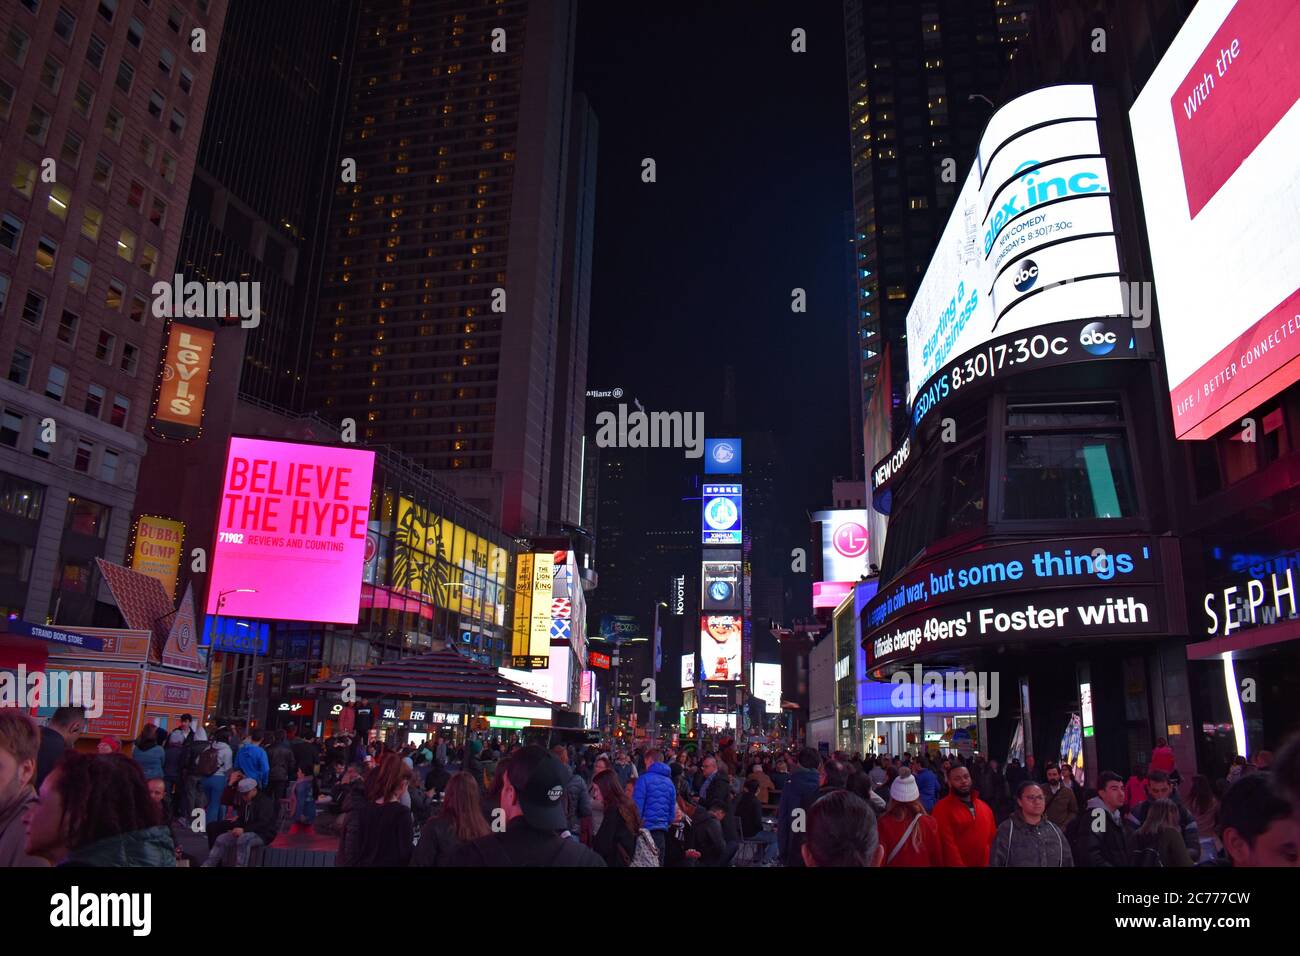 Times Square at night time.  LED advertising screens are shining brightly and the square is packed with tourists and people. Stock Photo